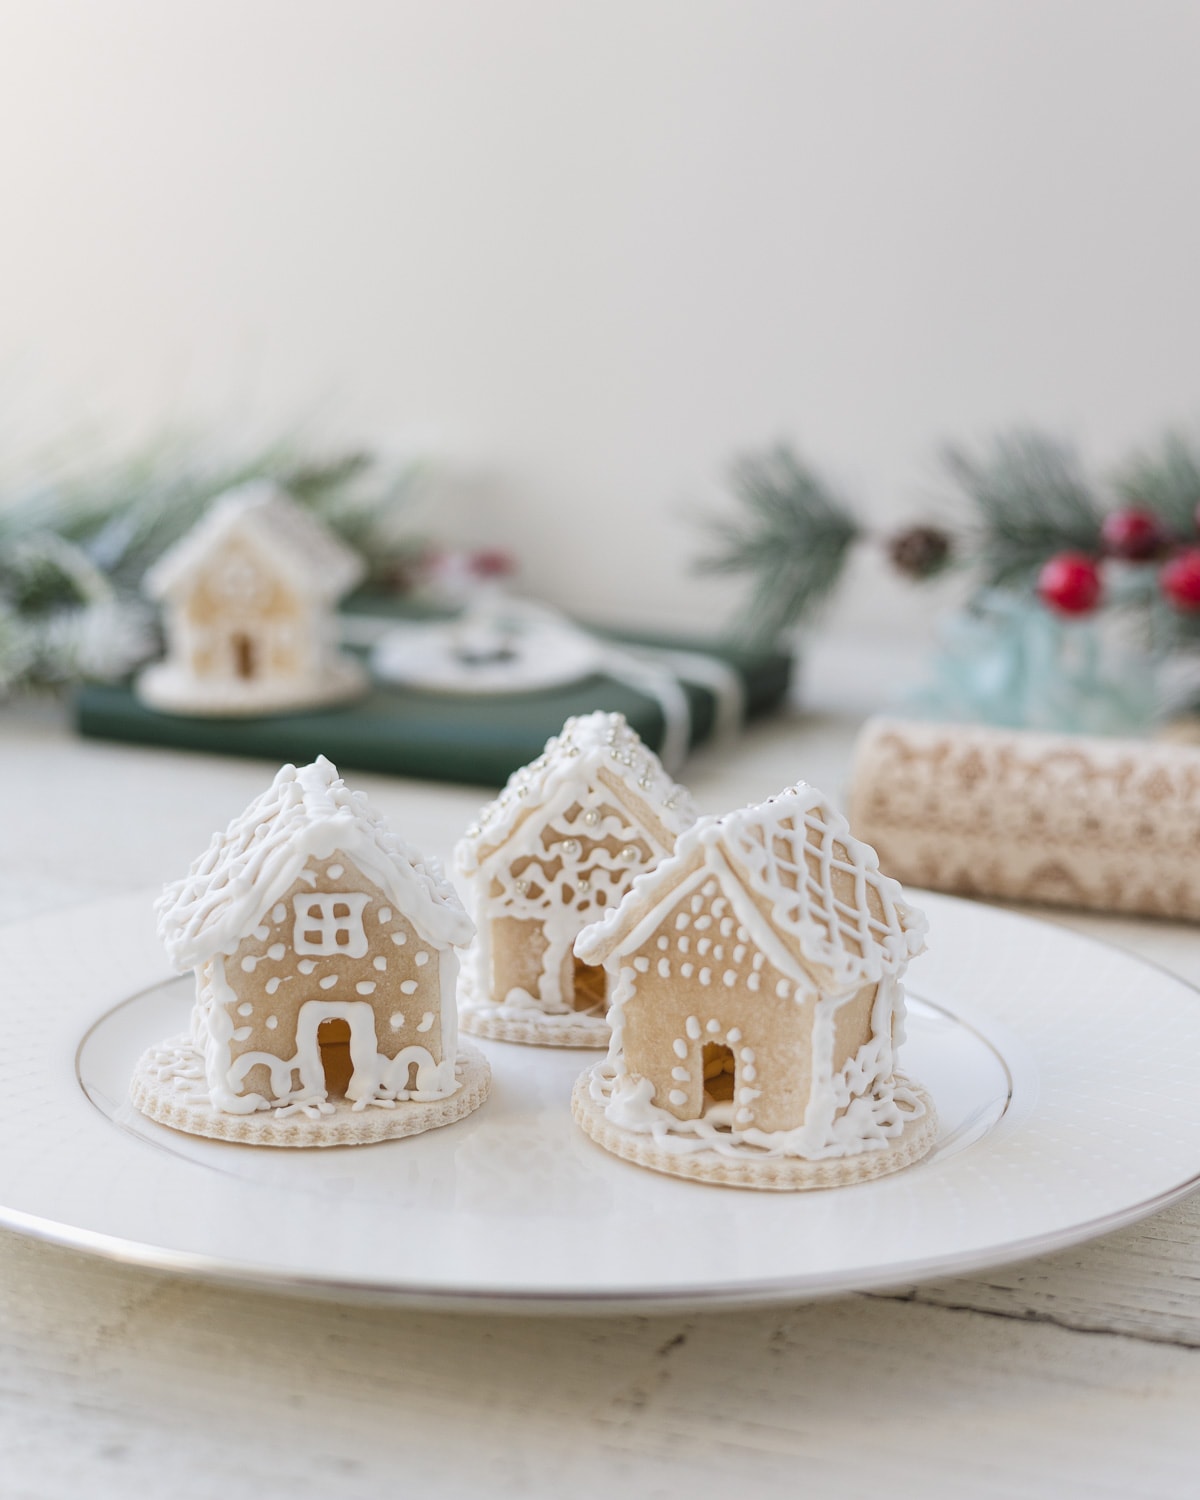 Three miniature salt dough gingerbread houses with royal icing.